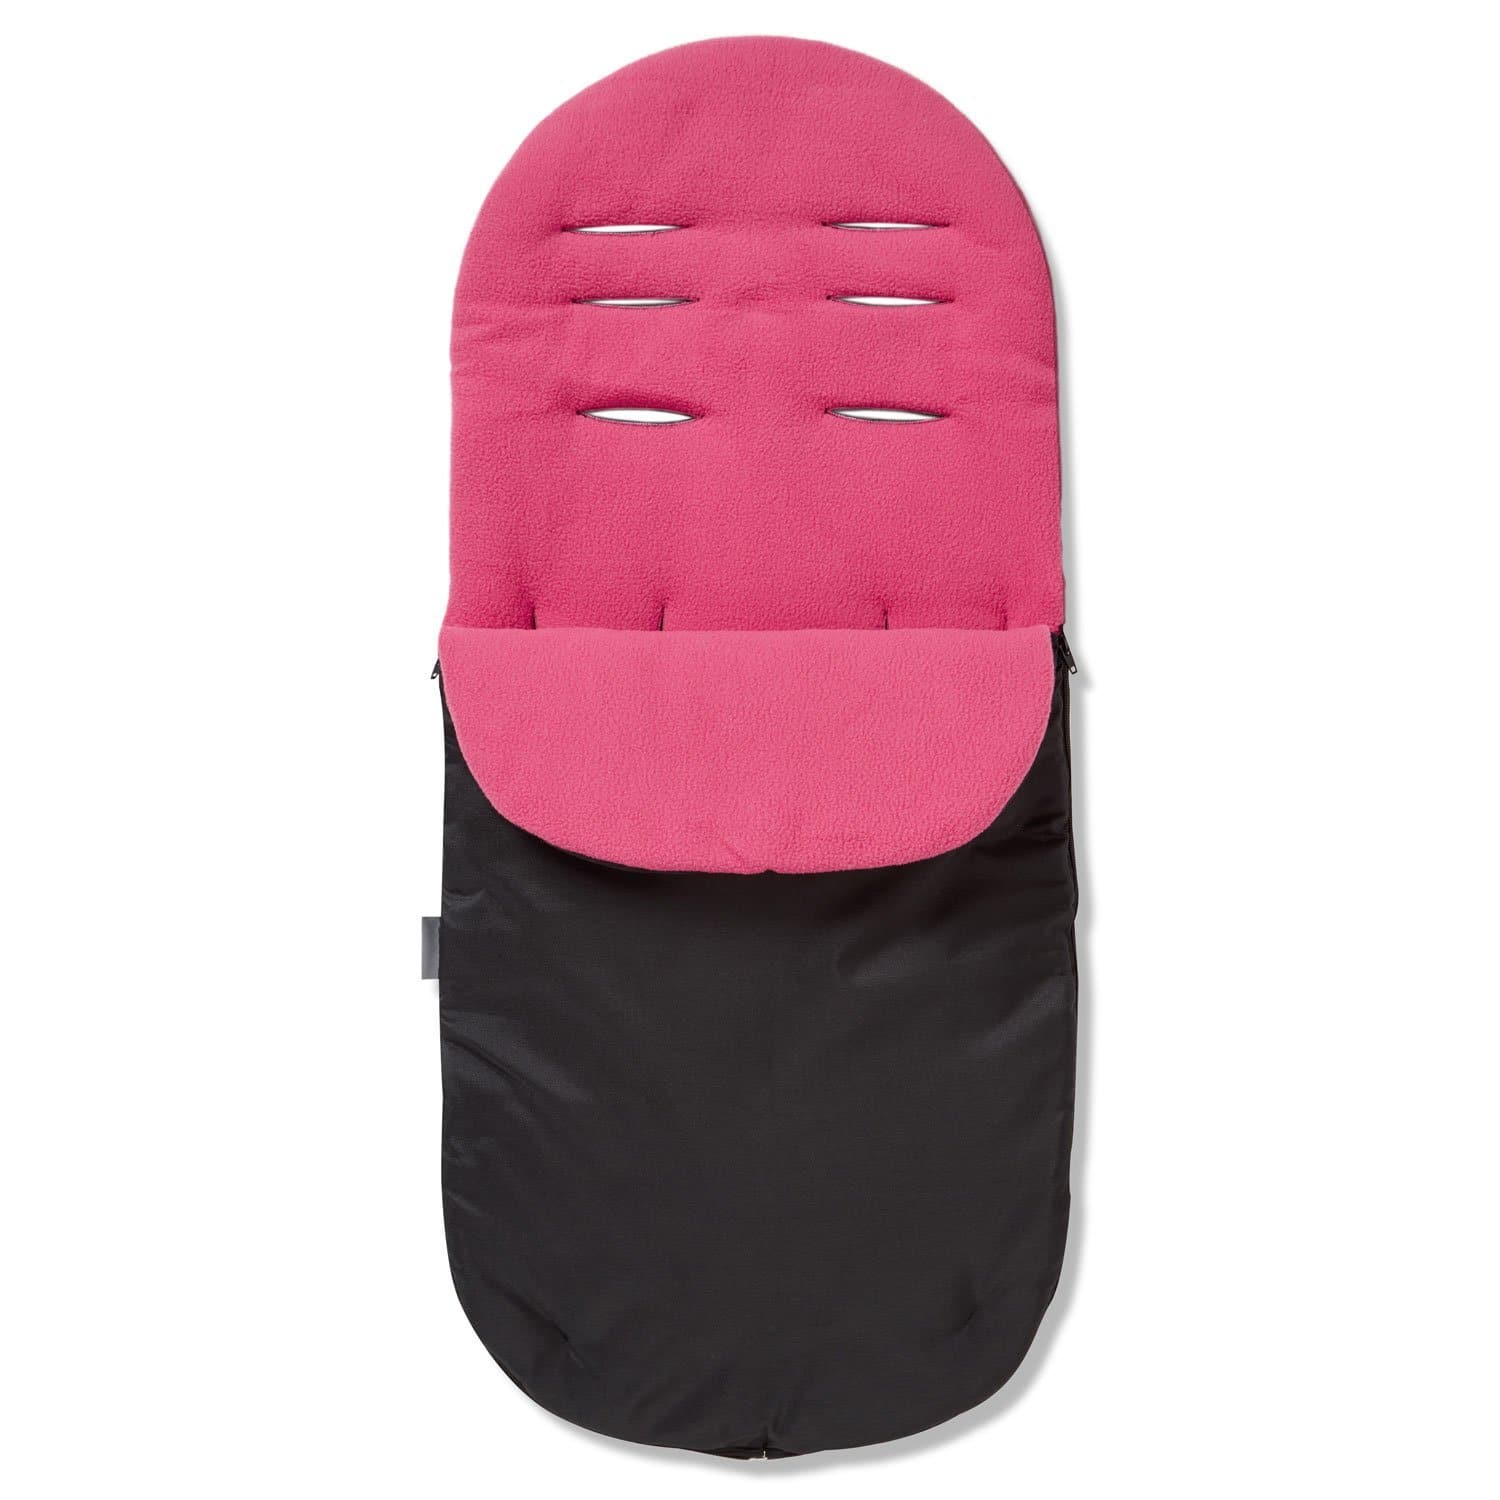 Footmuff / Cosy Toes Compatible with Egg - For Your Little One